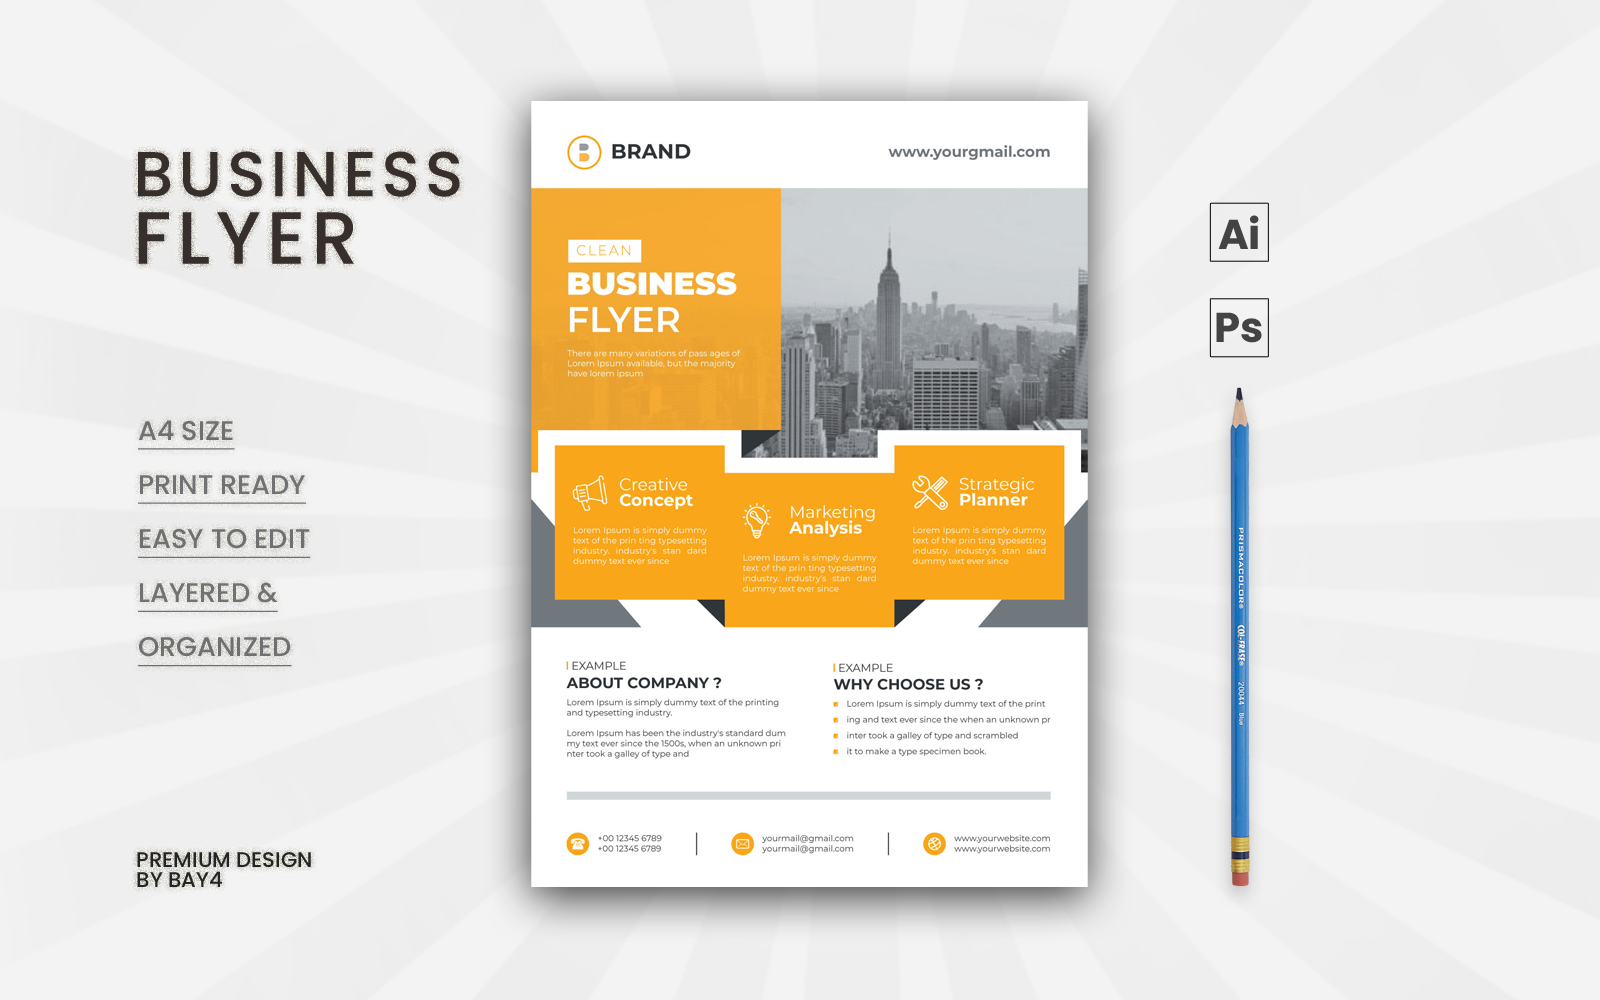 Template #190759 Corporate Business Webdesign Template - Logo template Preview